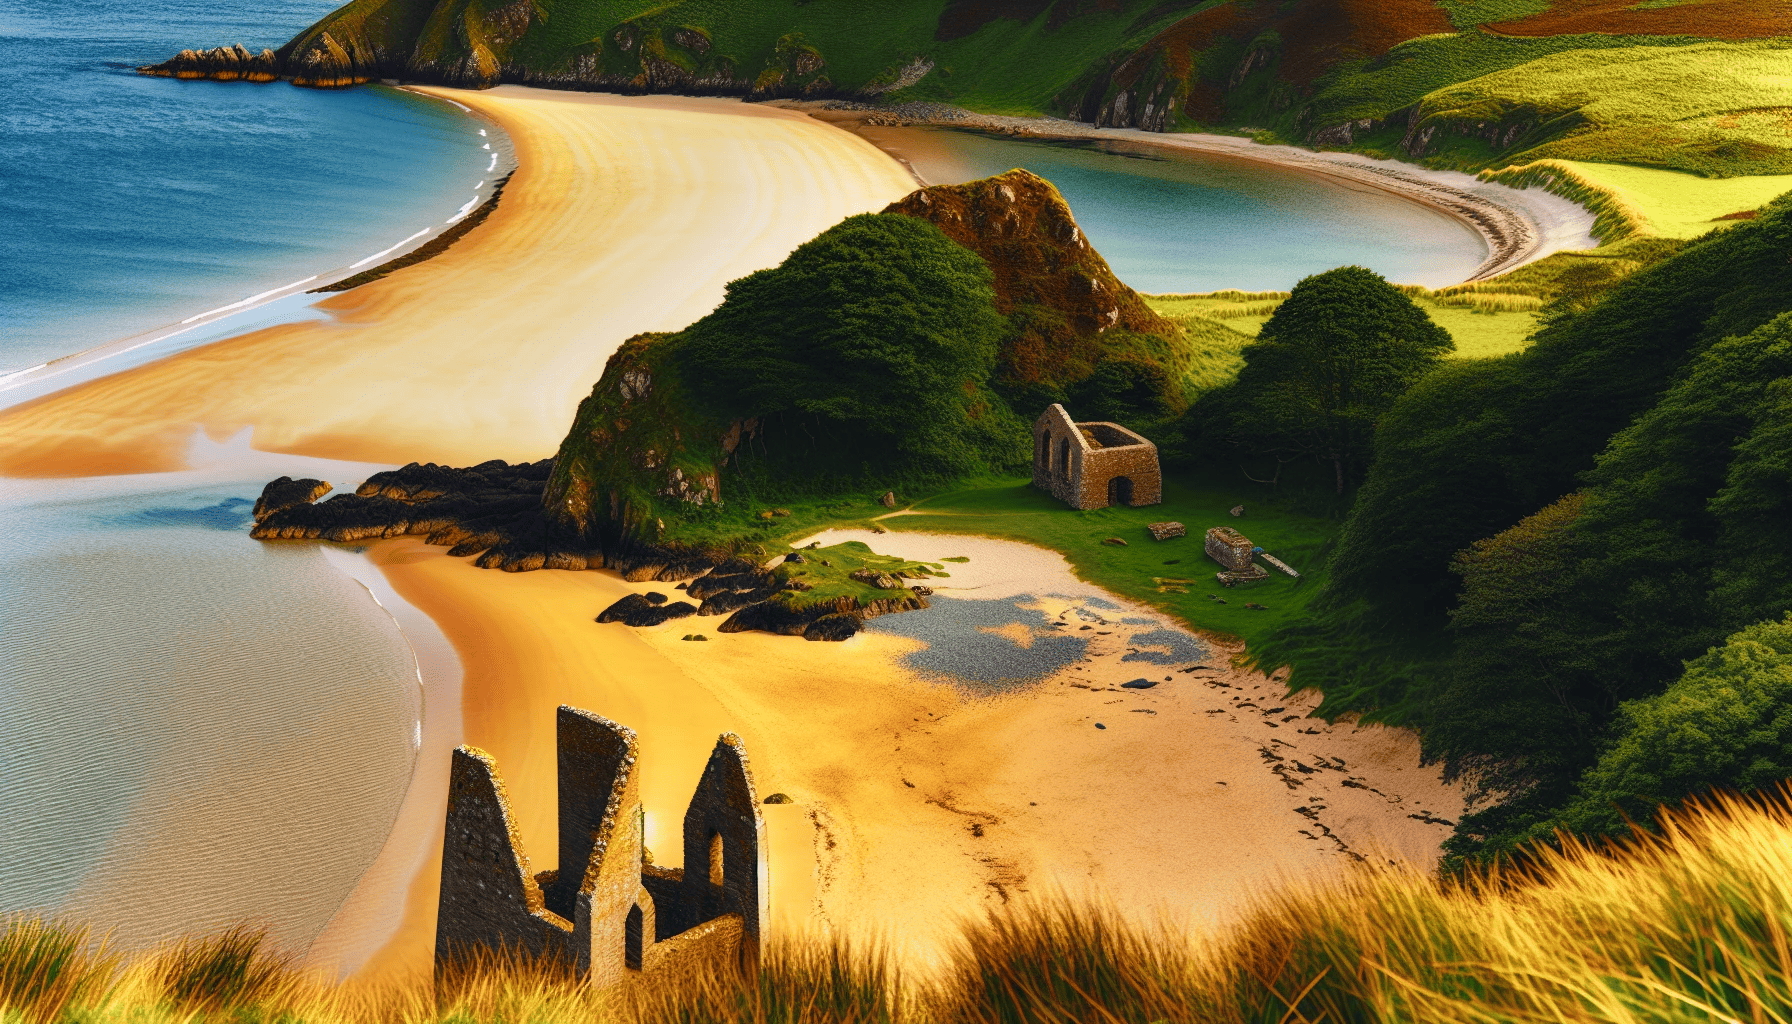 Murlough Bay with a sandy cove and old lime kilns